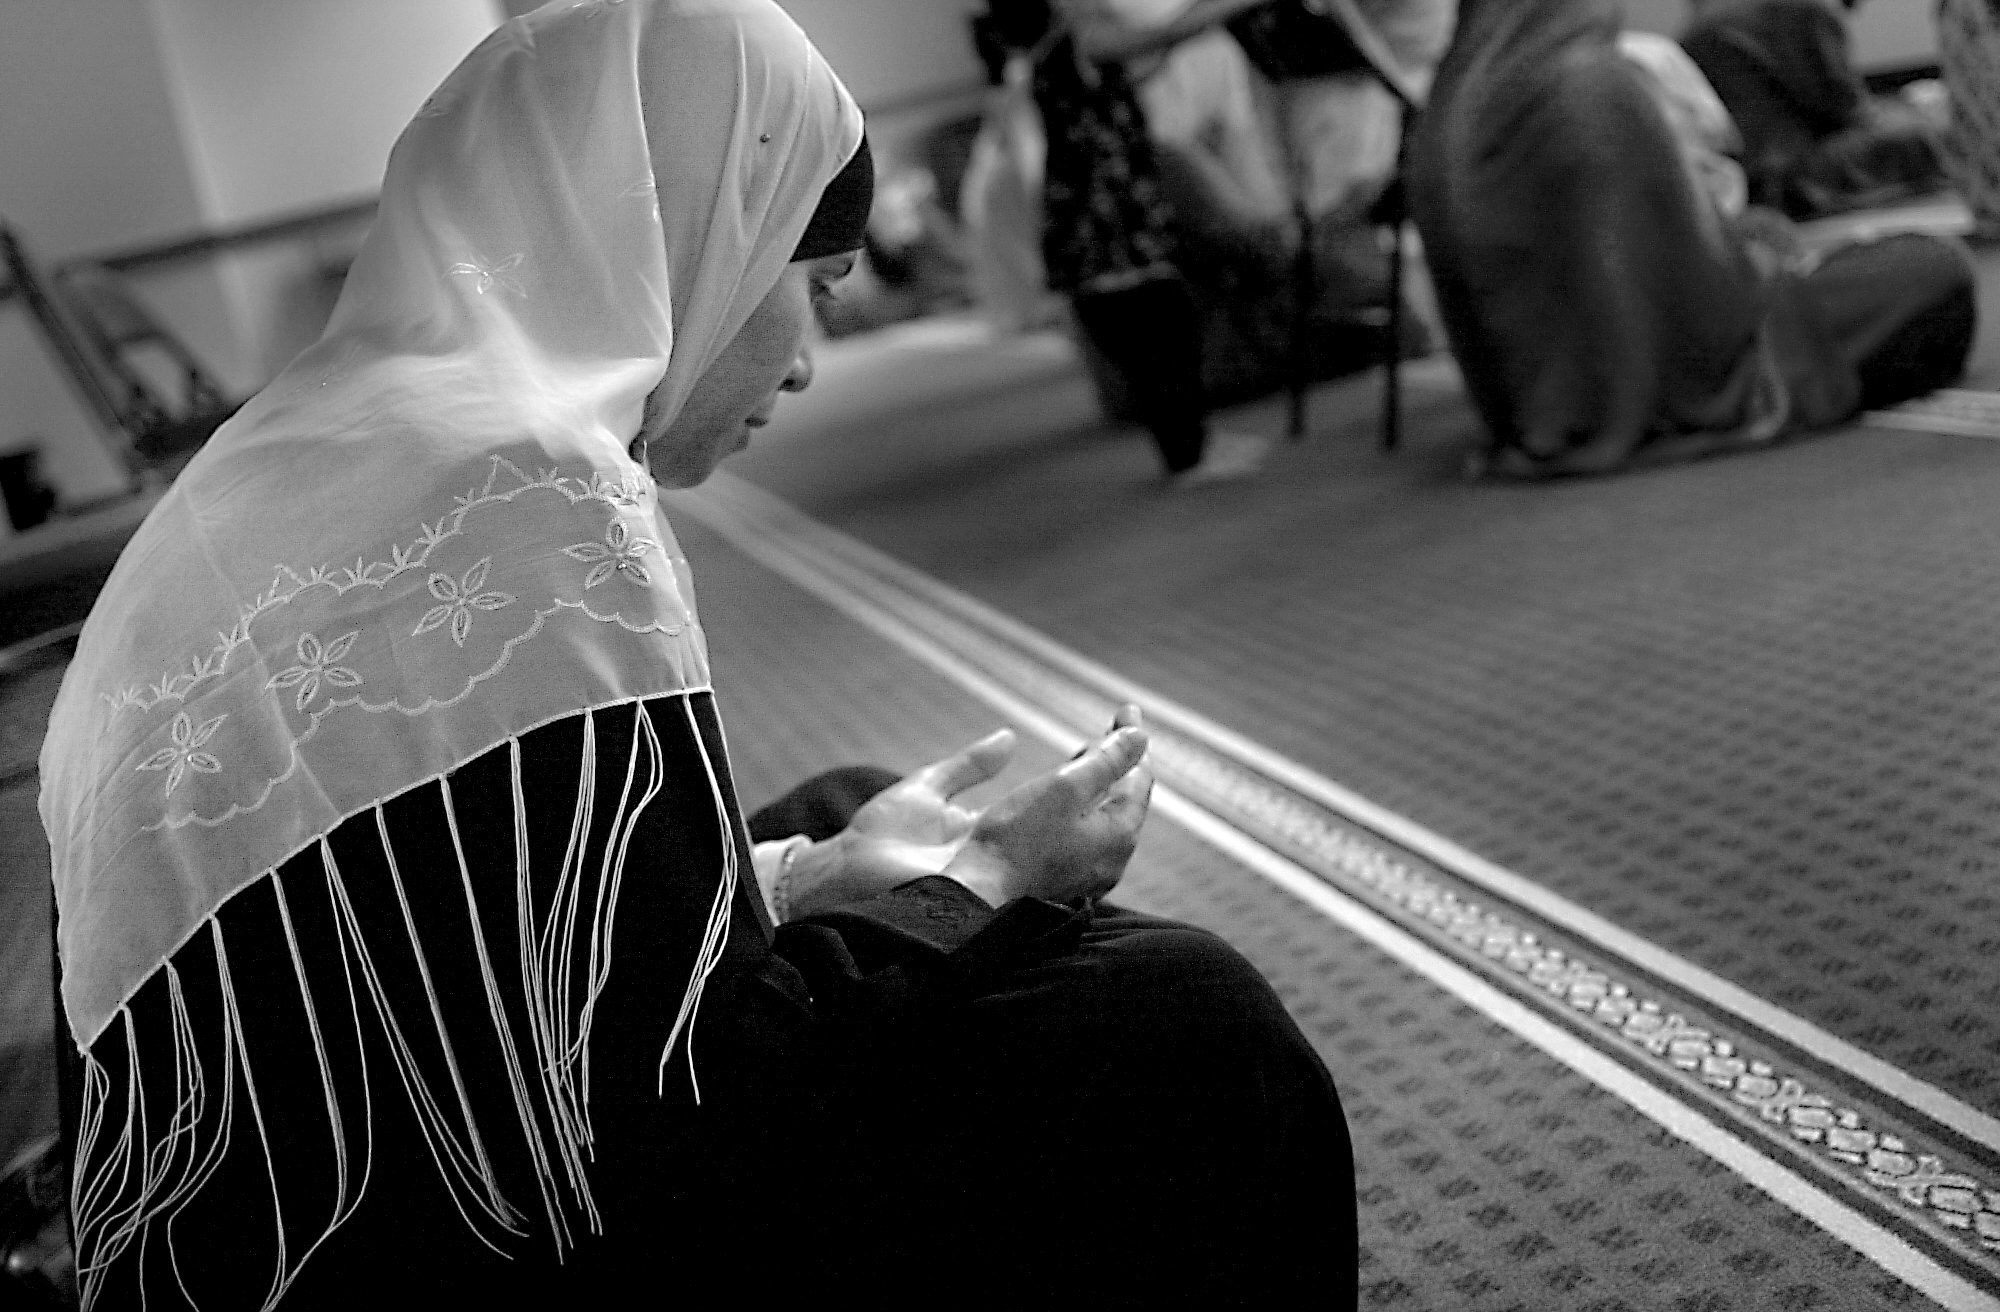 Image of a woman praying in a mosque